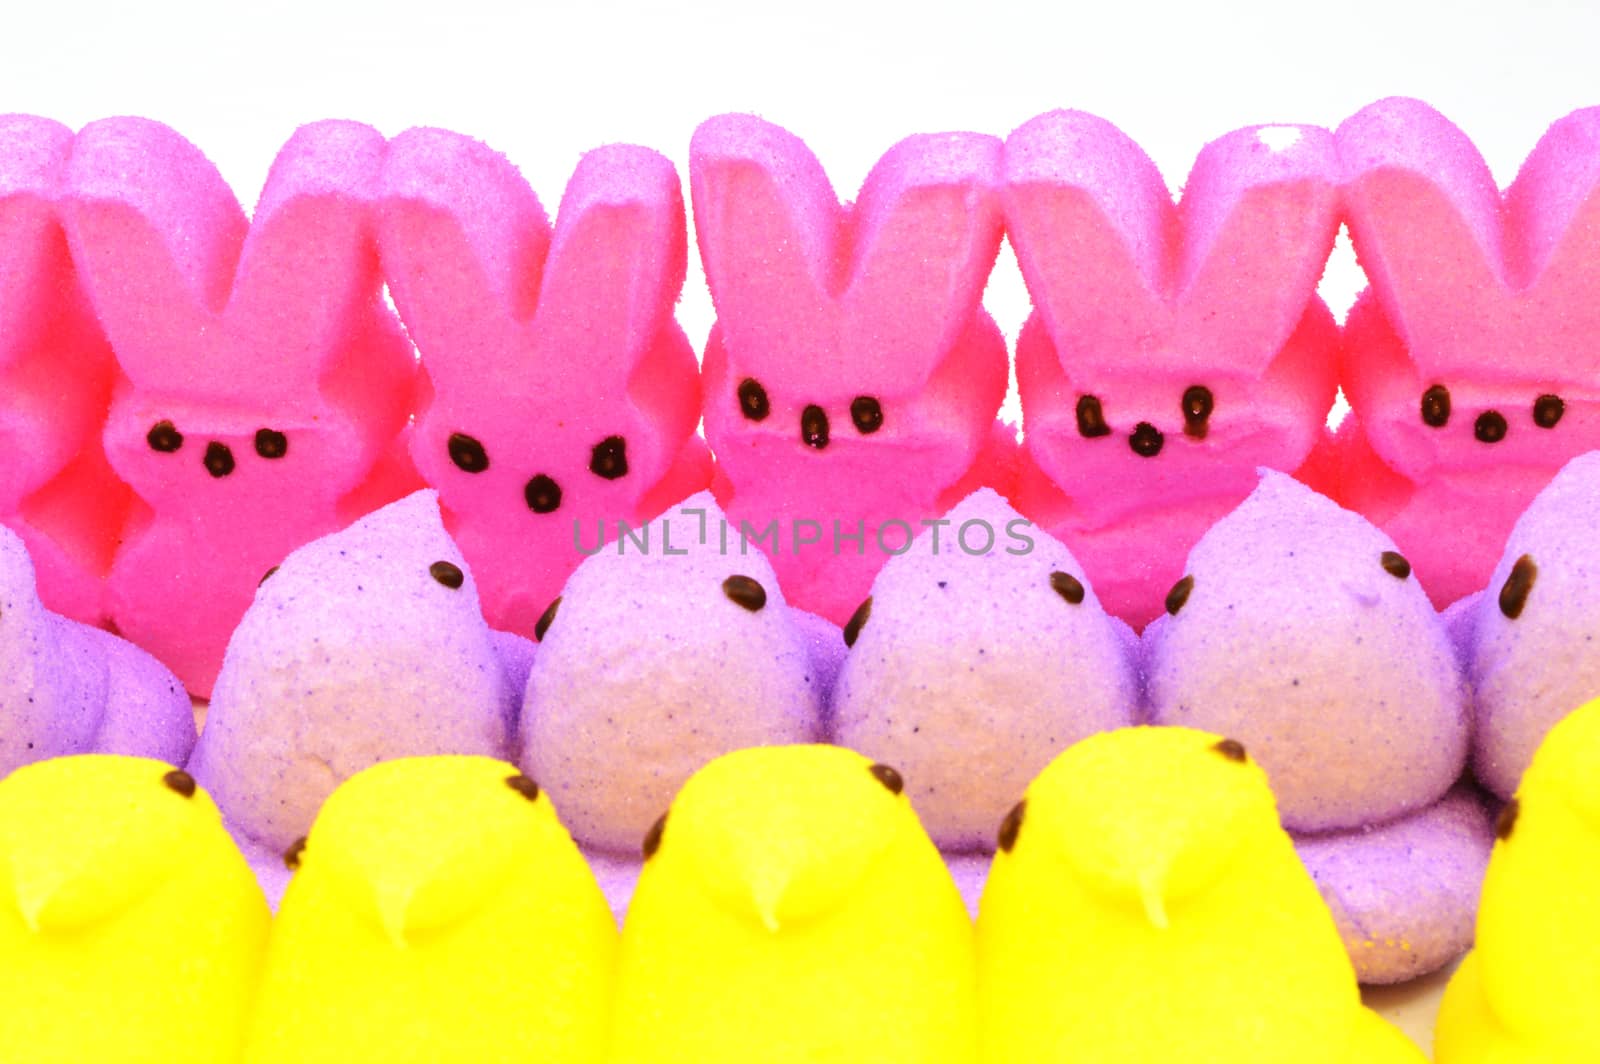 A closeup view of some Easter marshmallow treats.